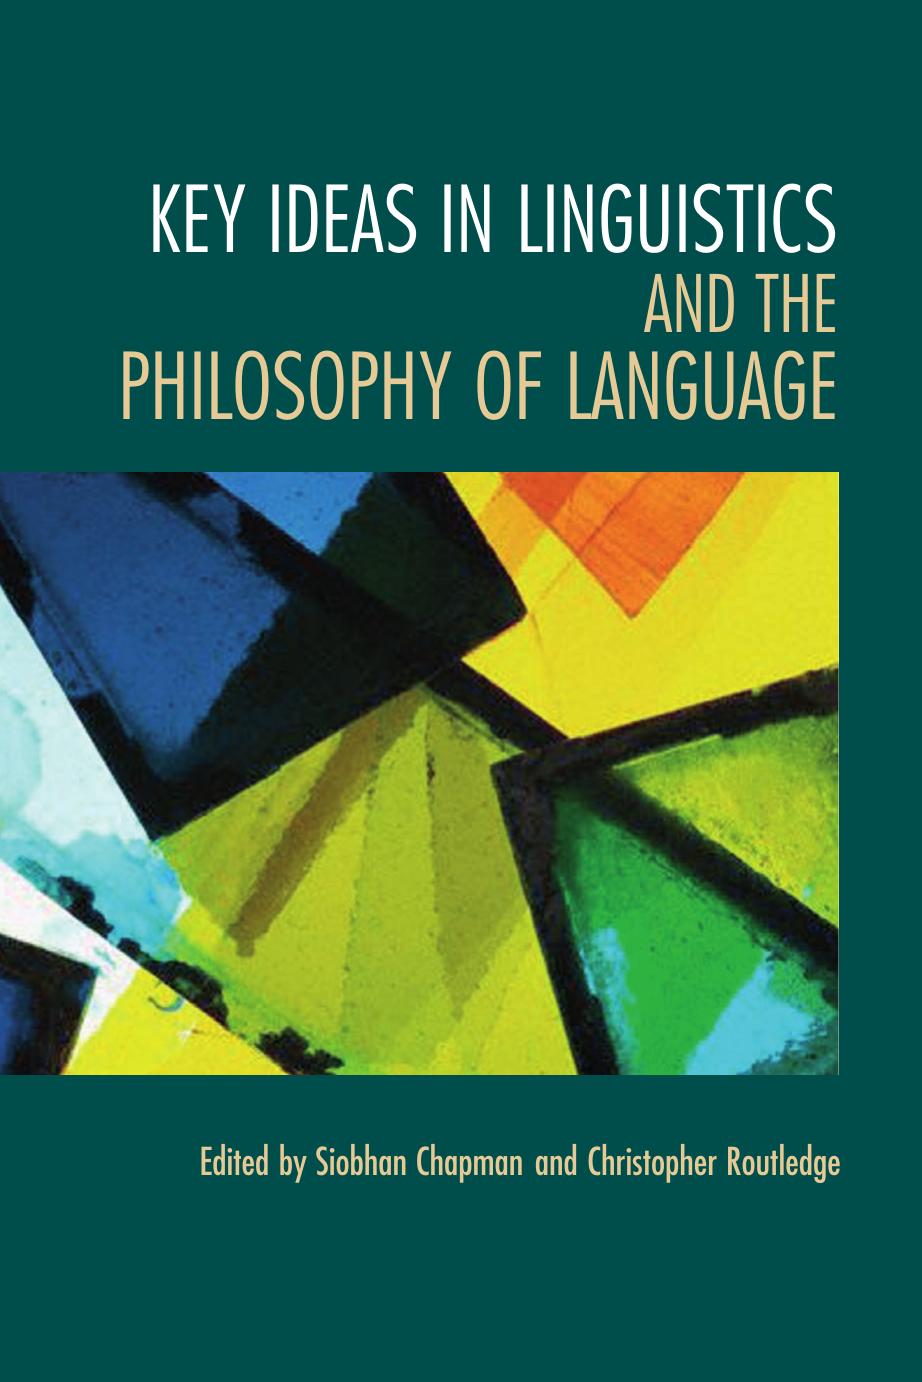 Key Ideas in Linguistics and the Philosophy of Language